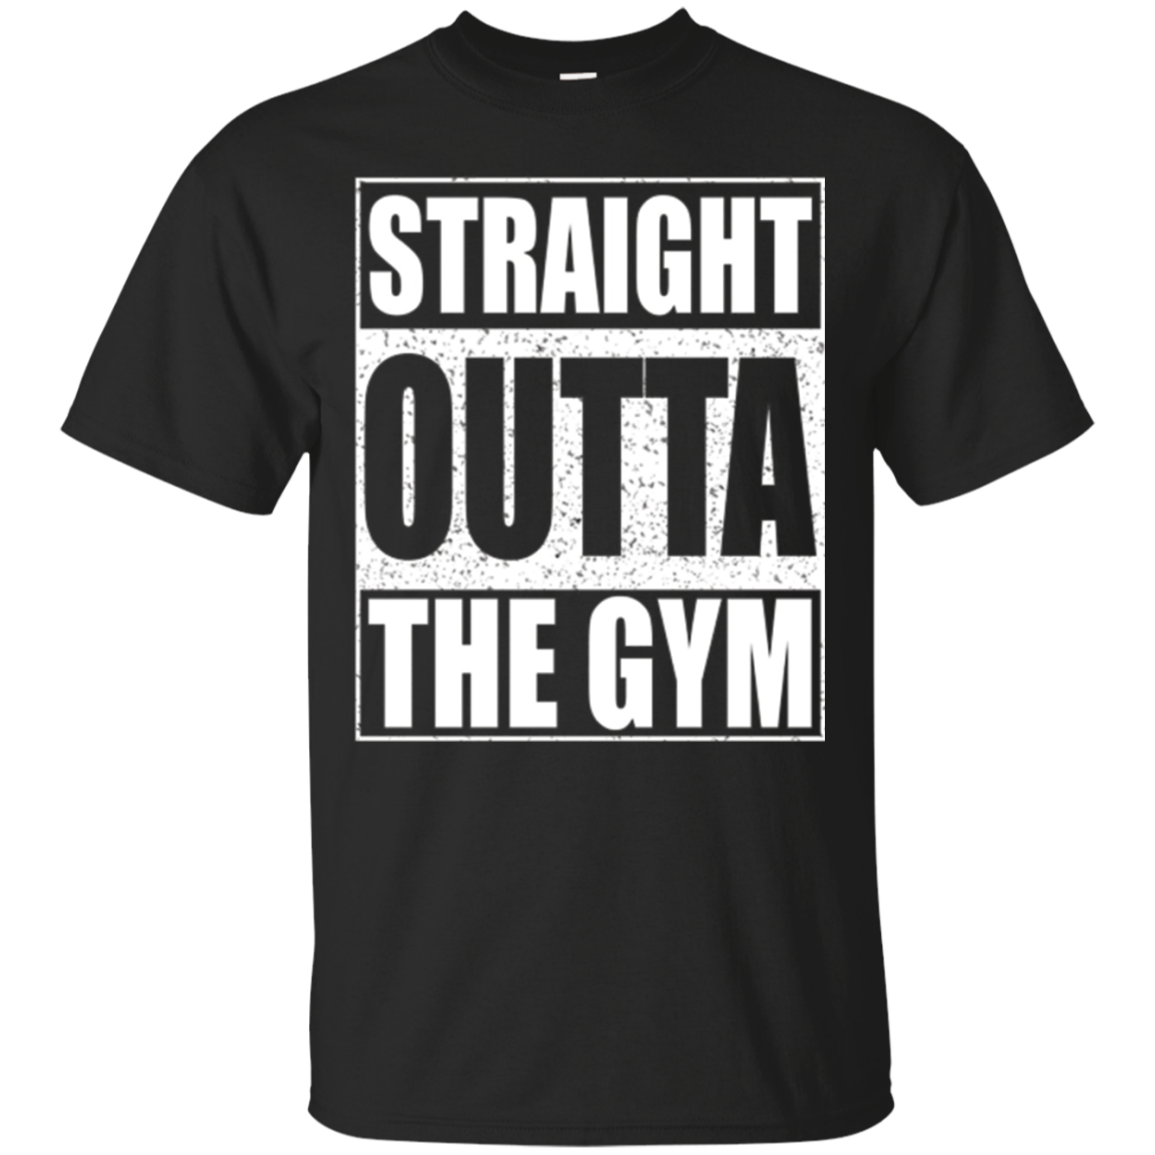 Straight Outta The Gym T-shirt Funny Workout Gift Shirt